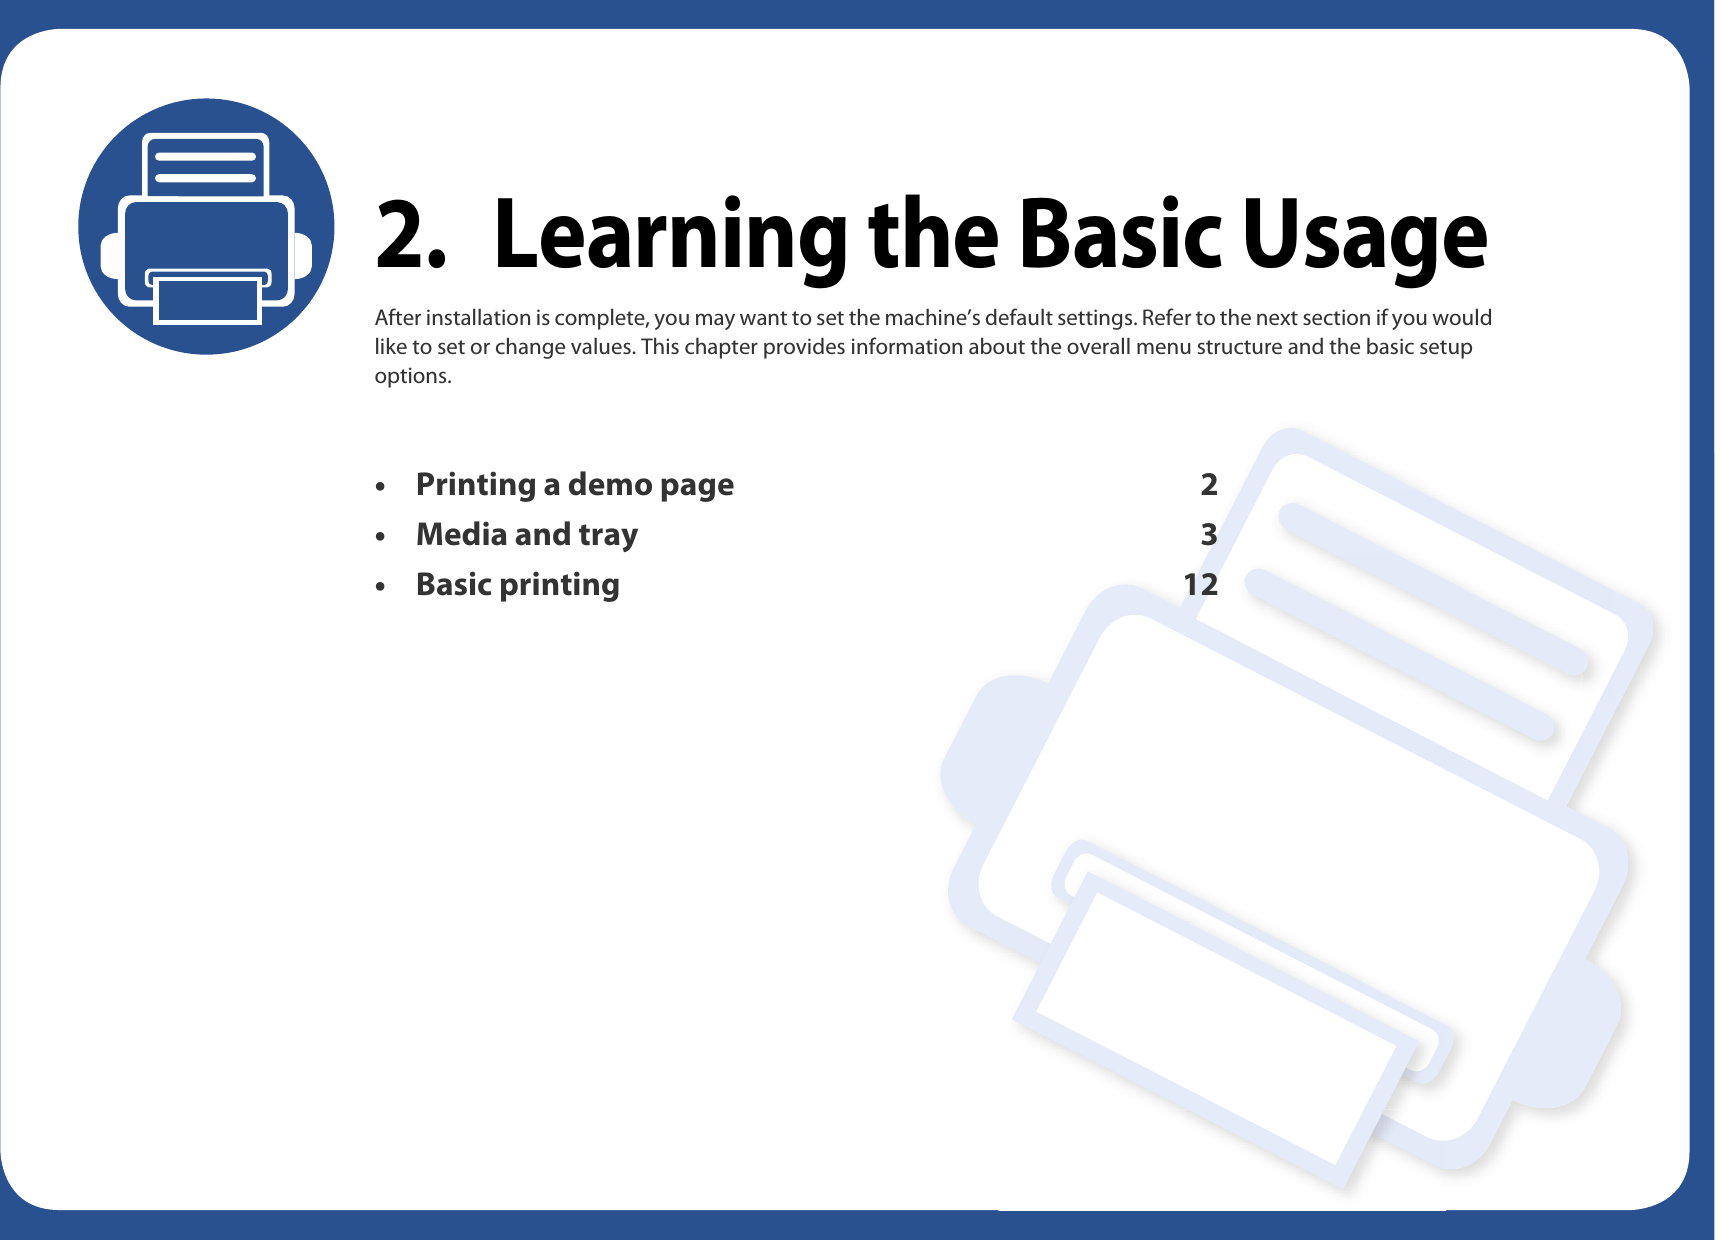 2. Learning the Basic UsageAfter installation is complete, you may want to set the machine’s default settings. Refer to the next section if you would like to set or change values. This chapter provides information about the overall menu structure and the basic setup options.• Printing a demo page 2• Media and tray 3• Basic printing 12